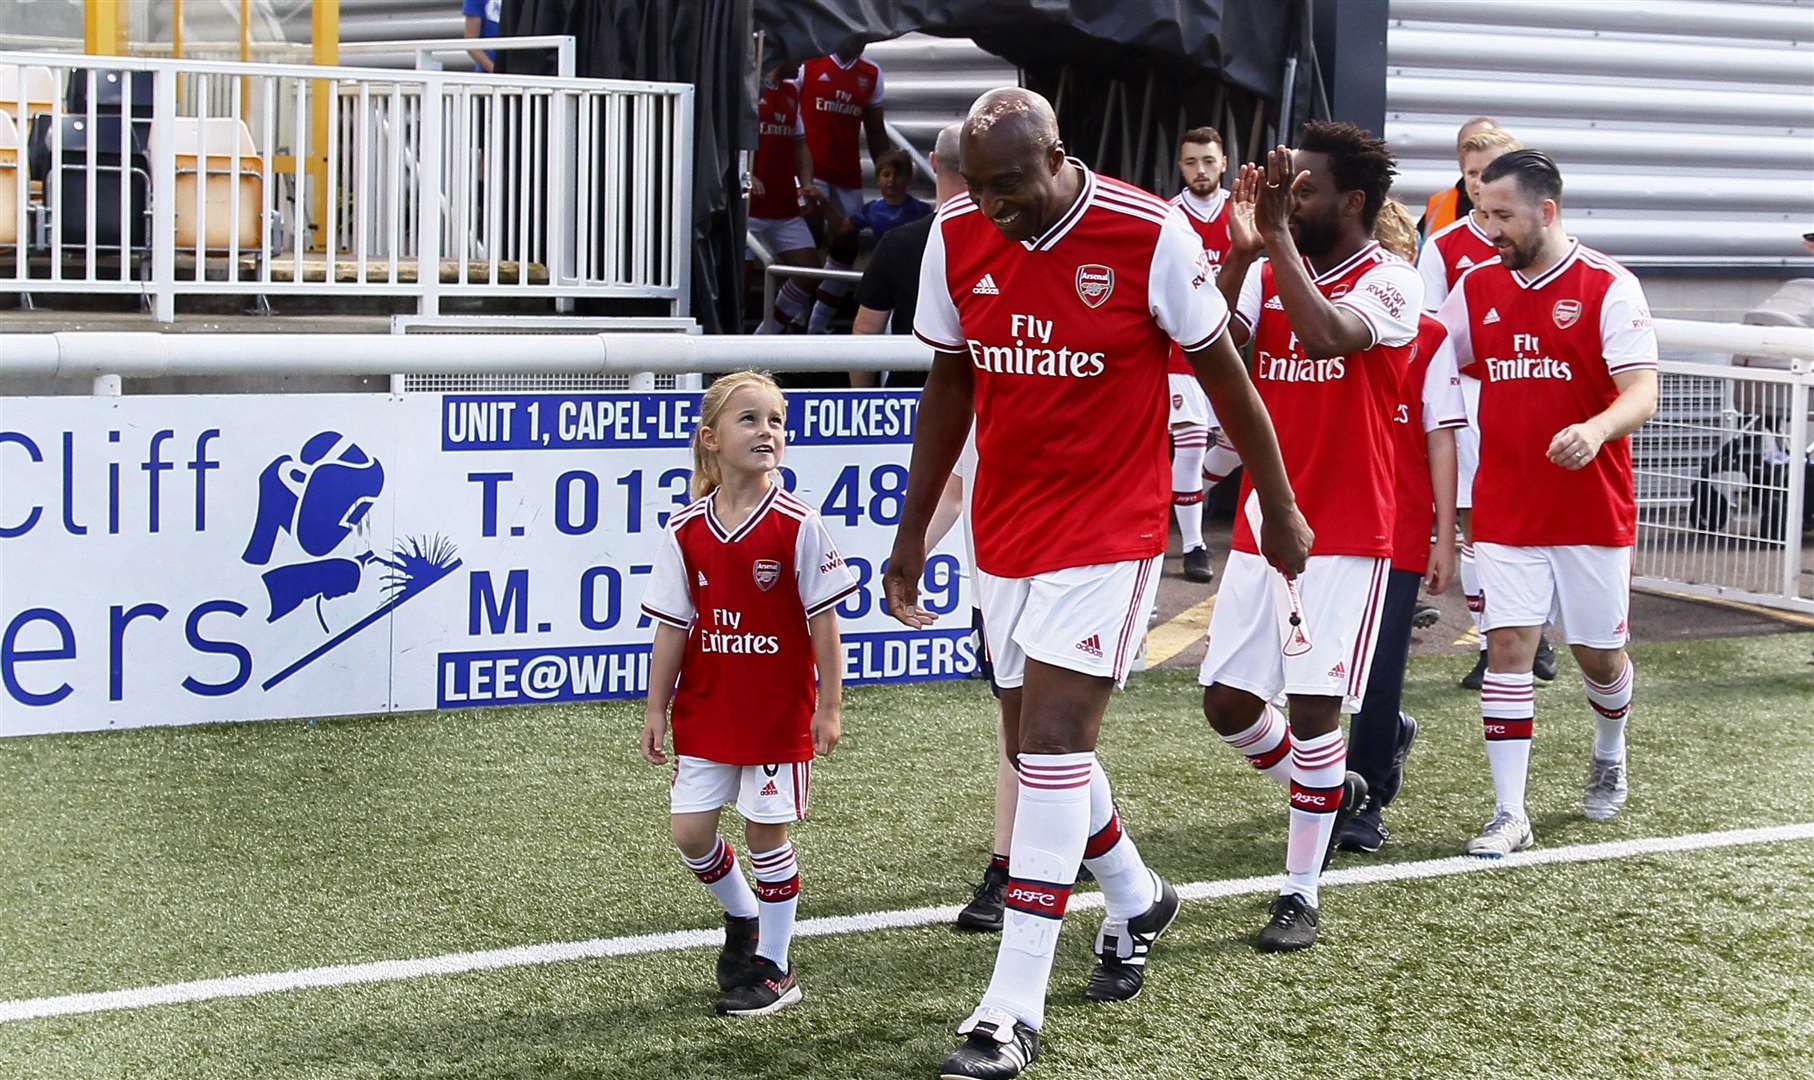 1980s footballer Chris Whyte leads out the Arsenal team at the Charity Football Match at the Gallagher Stadium Maidstone. Picture: Sean Aidan15399209)